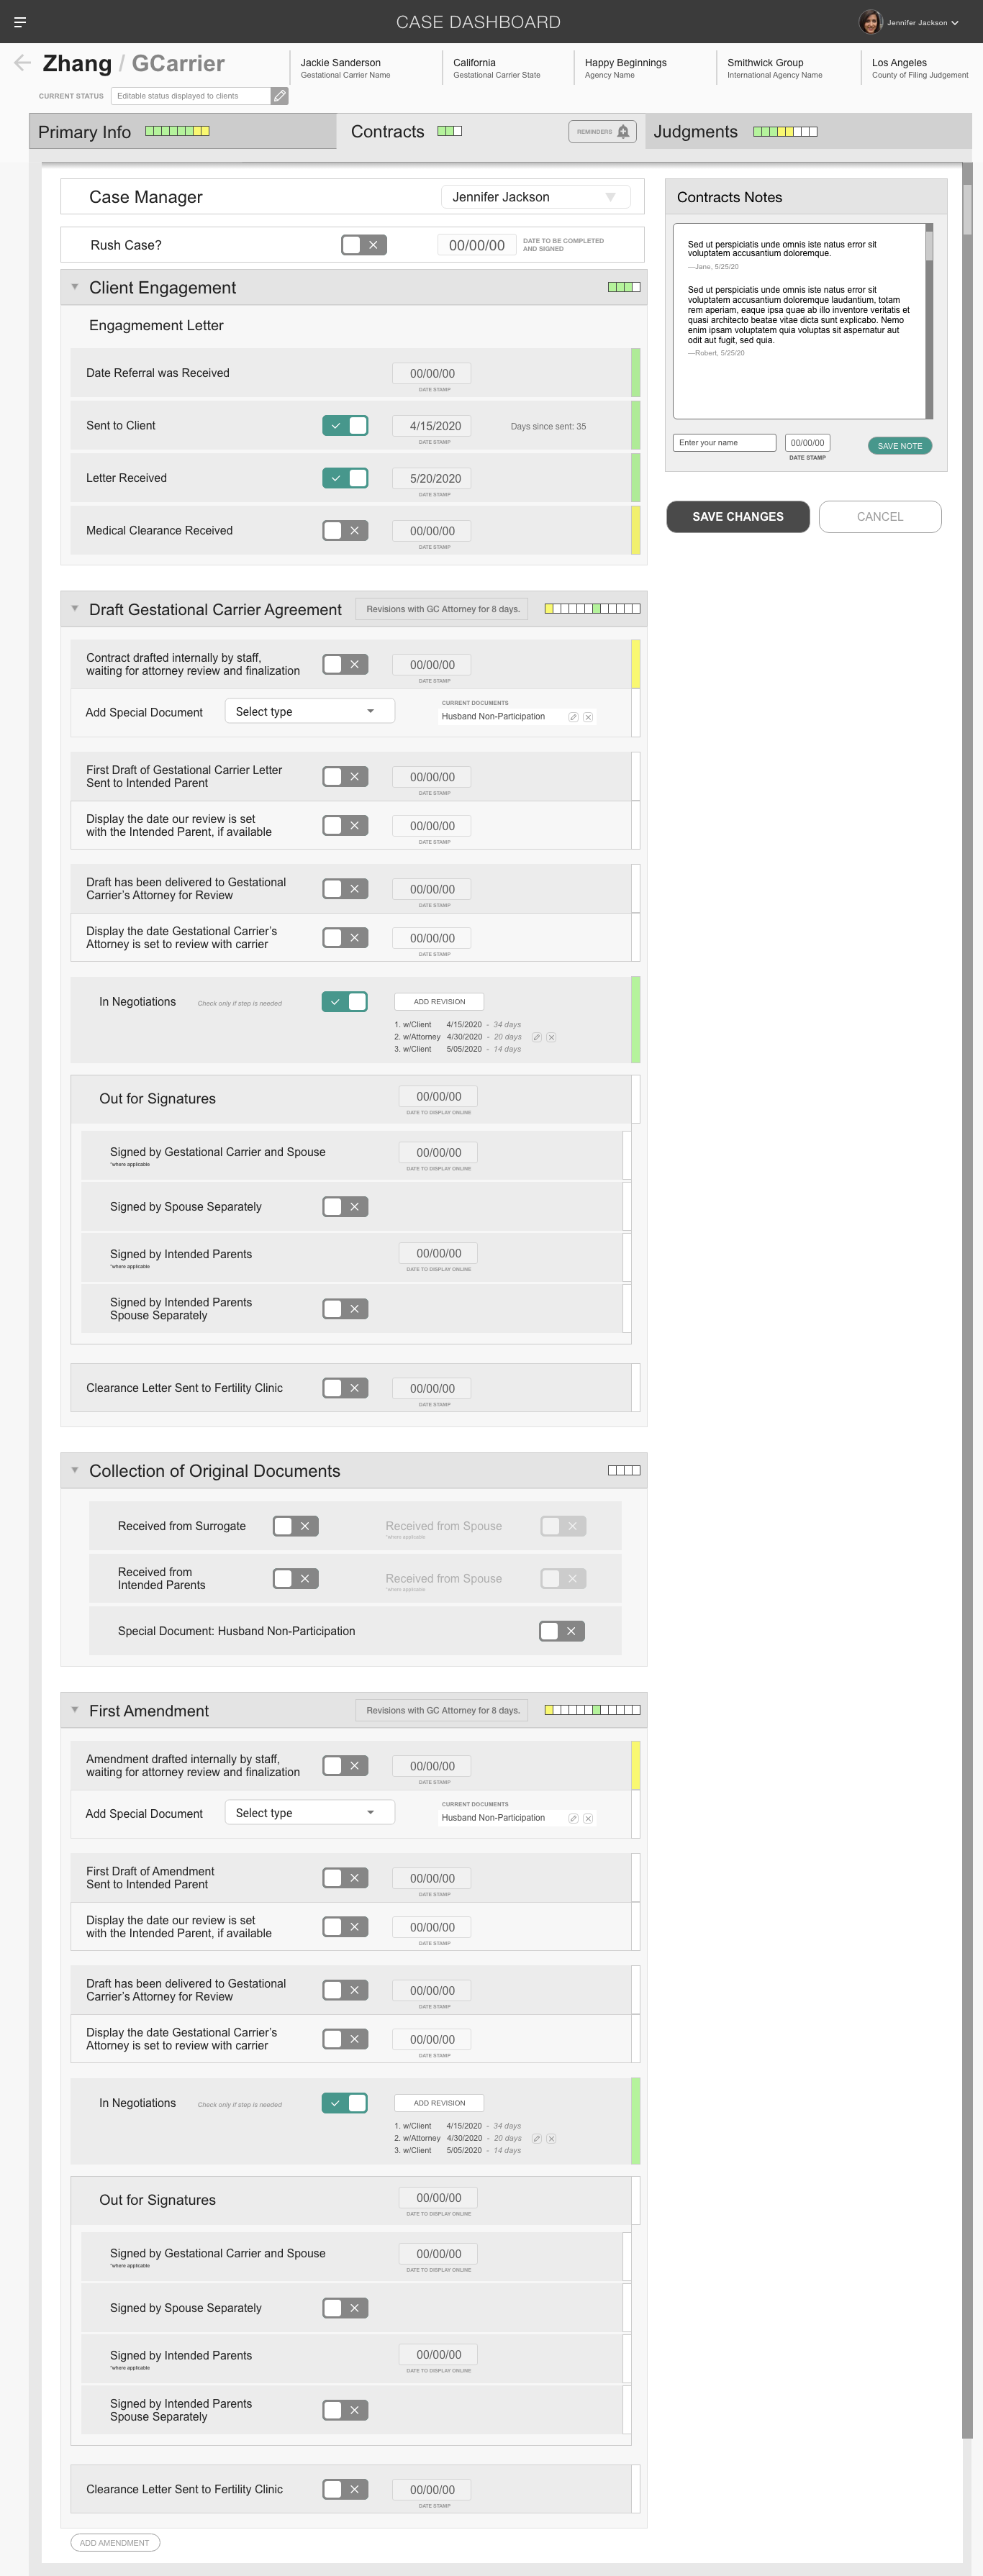 Image of Case Dashboard User Experience Design